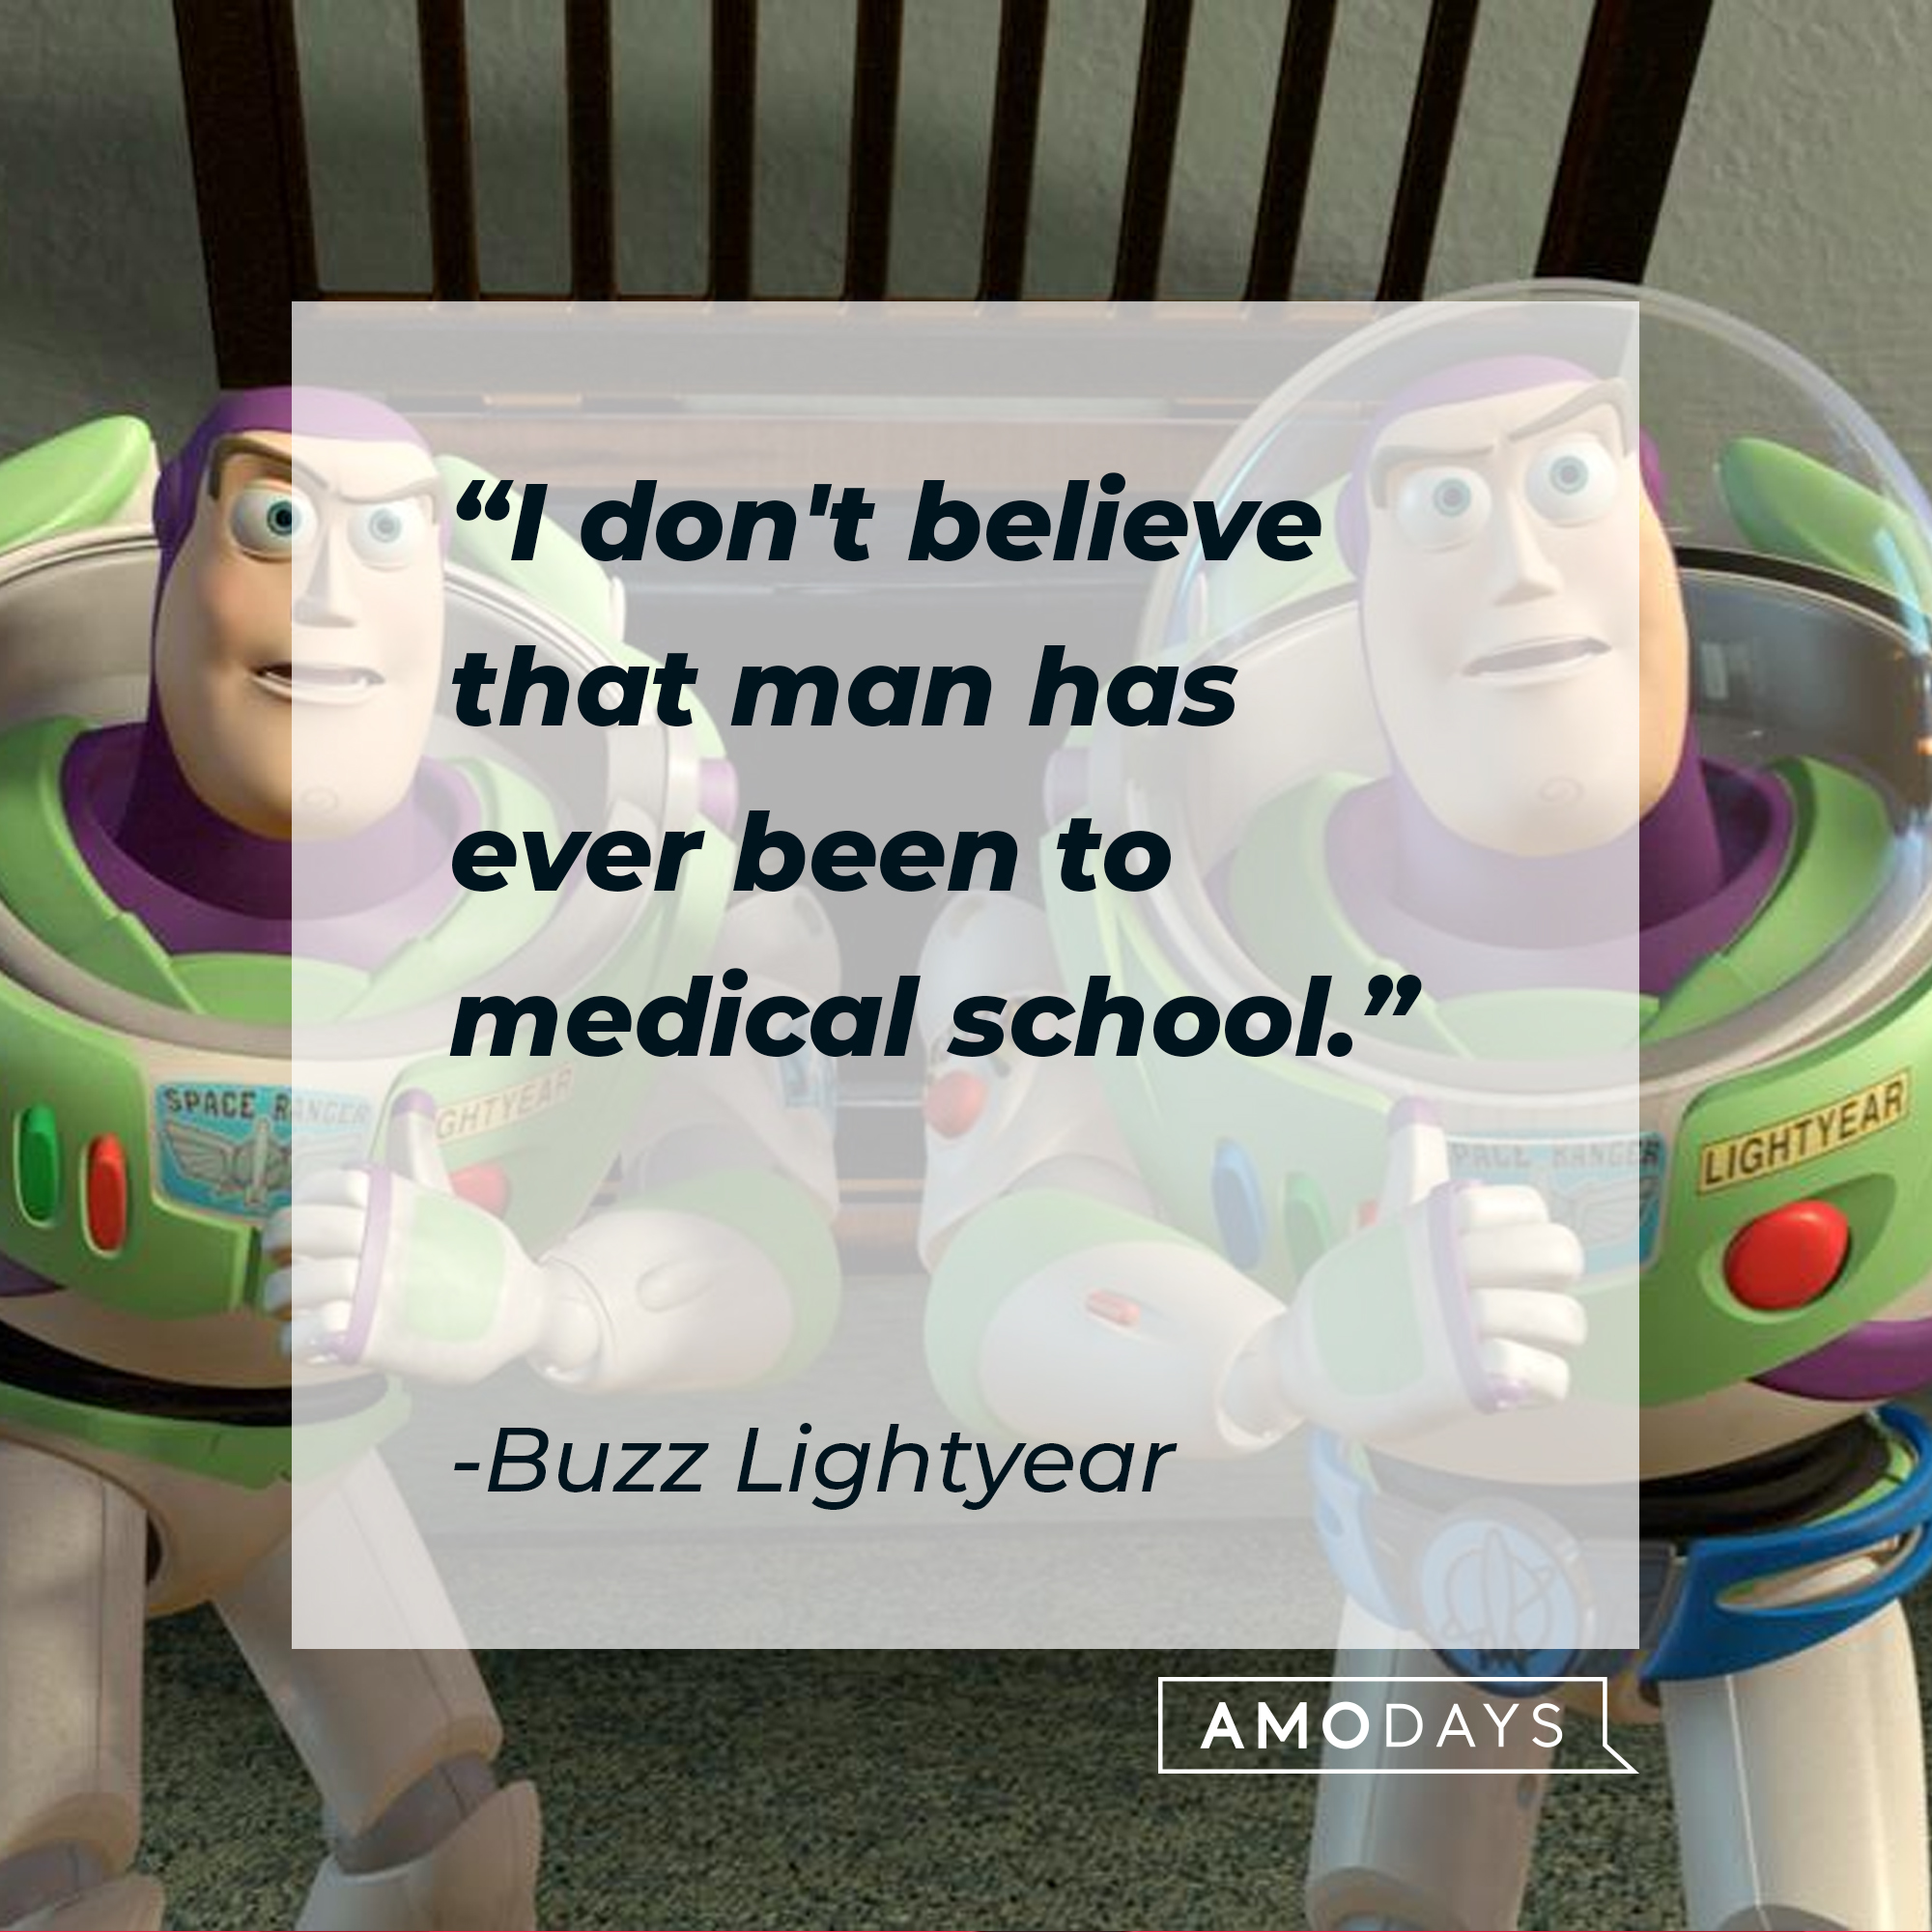 Buzz Lightyear's quote: "I don't believe that man has ever been to medical school." | Source: Facebook/BuzzLightyear